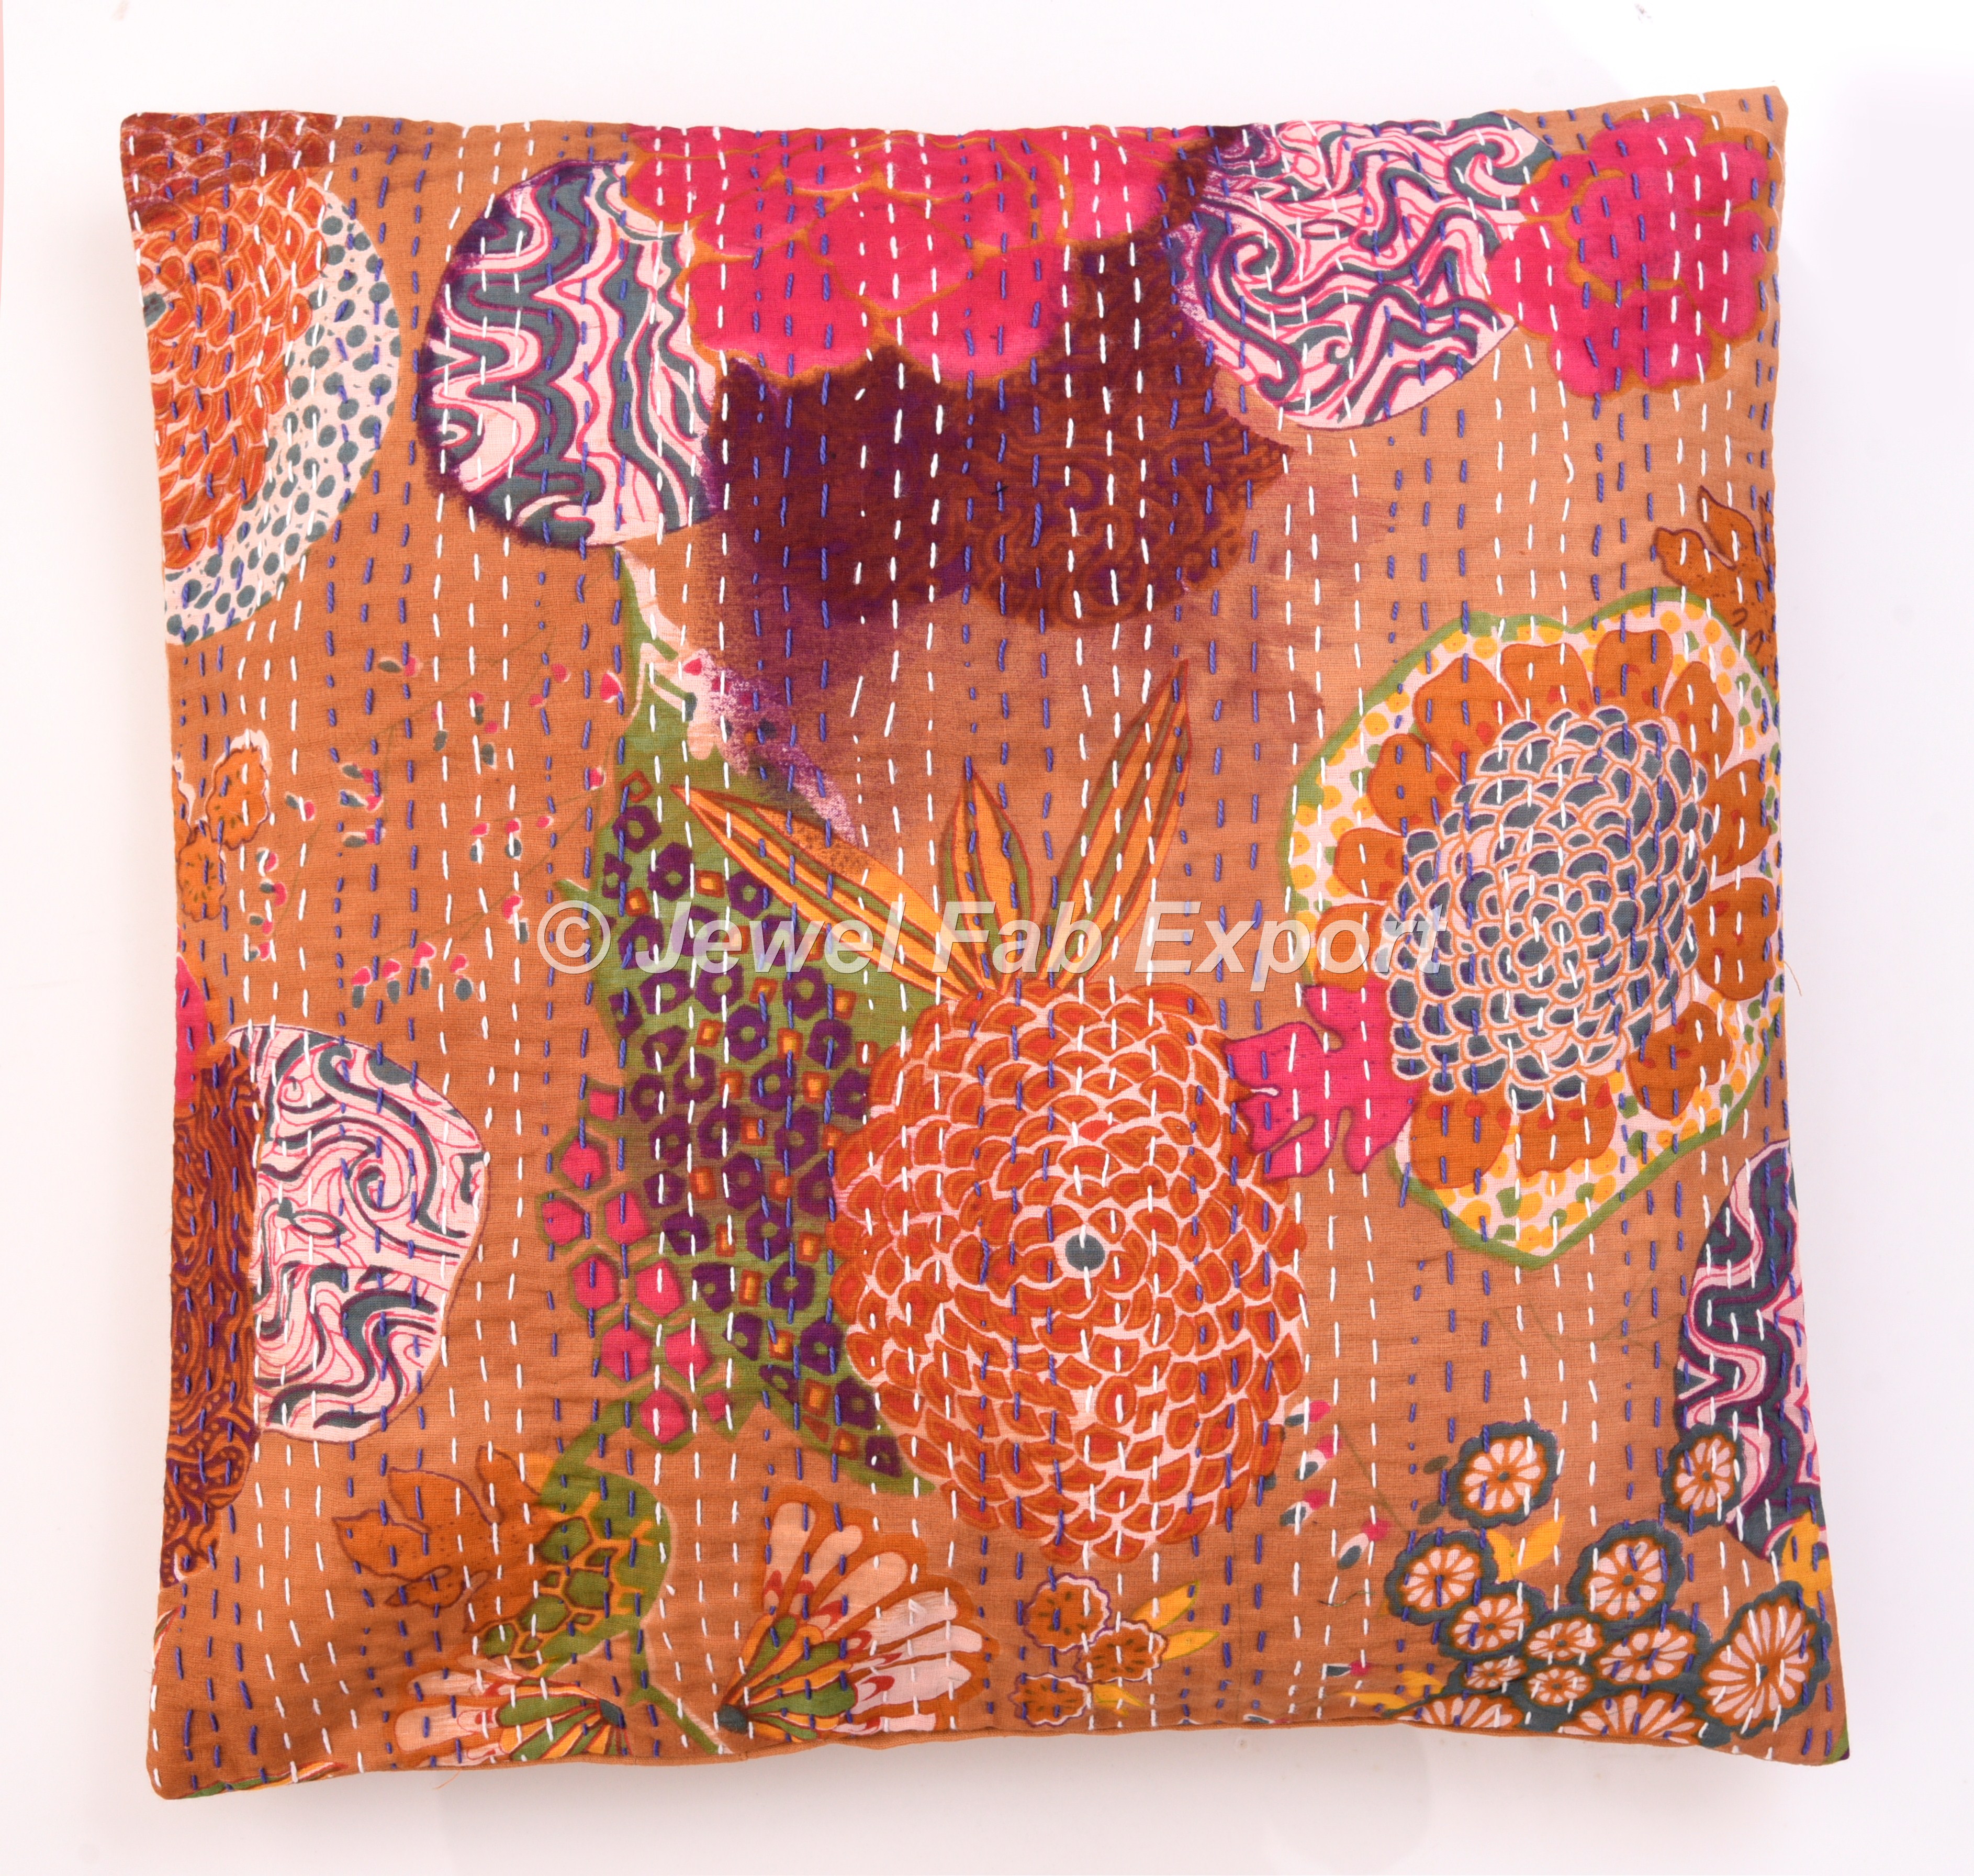 Details about   New Indian Art Handmade Cotton Kantha-Work Pair Pillow-Cushion Cover Room Decor 